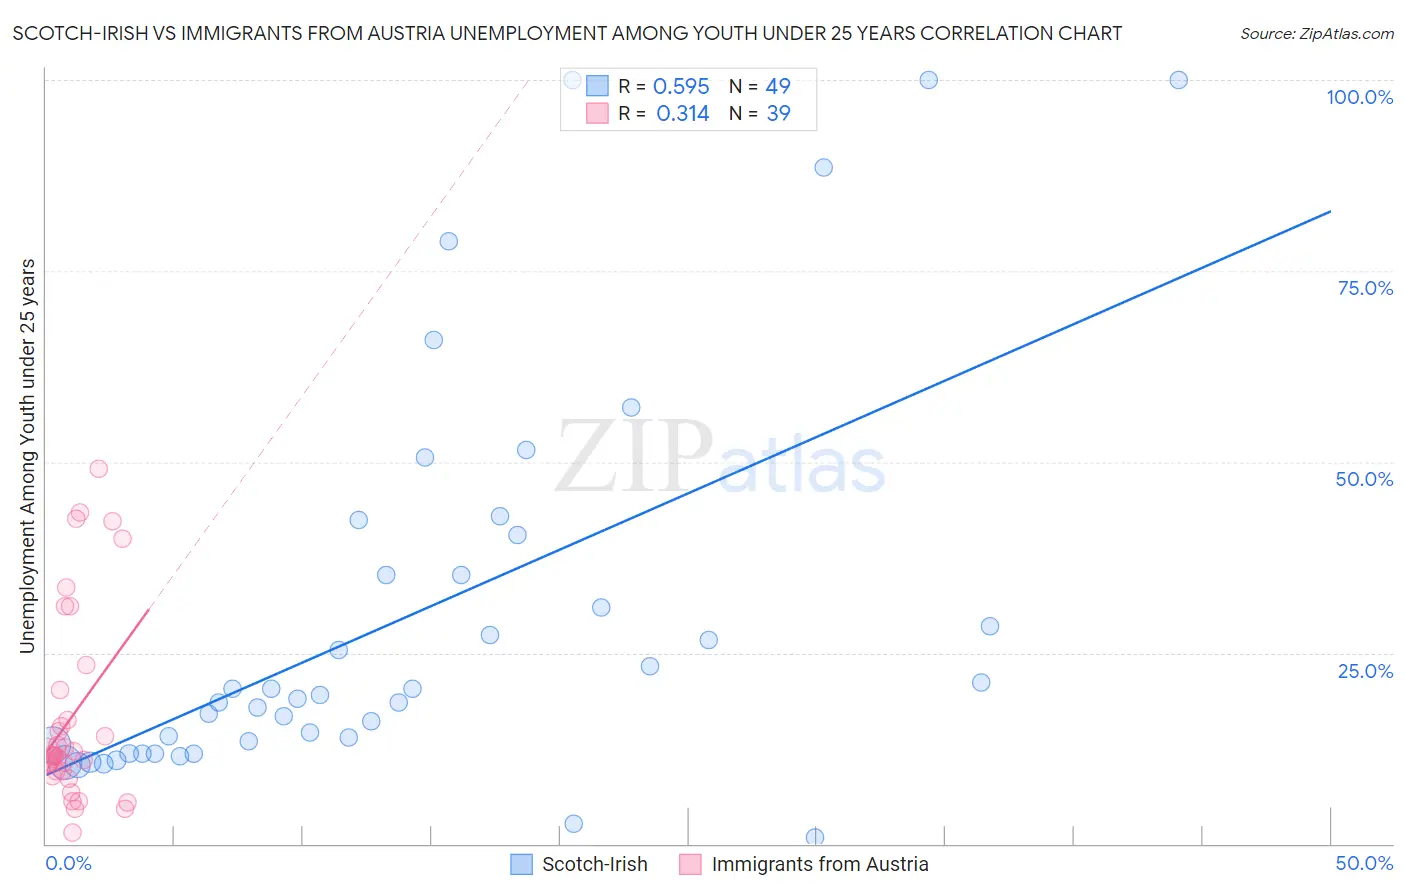 Scotch-Irish vs Immigrants from Austria Unemployment Among Youth under 25 years